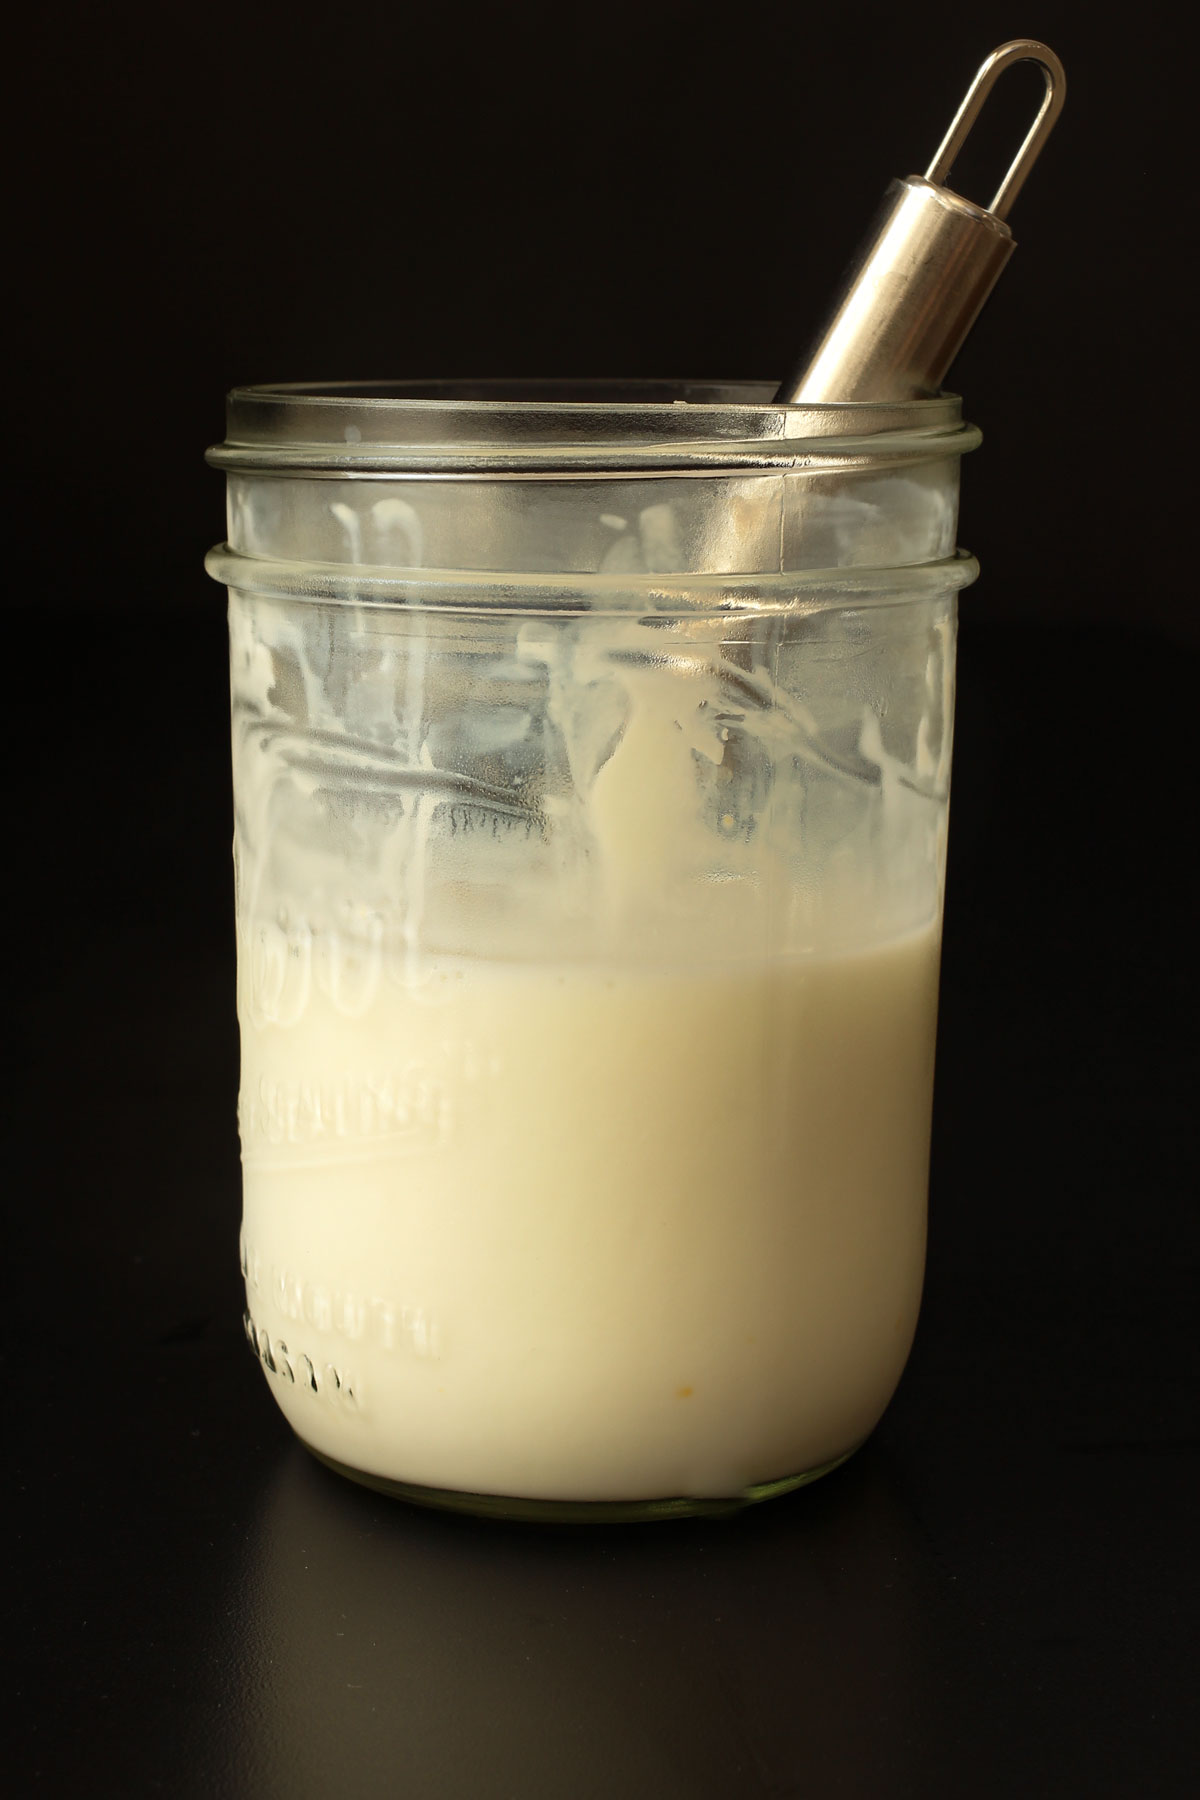 1 cup of buttermilk thawed and whisked in a pint mason jar.